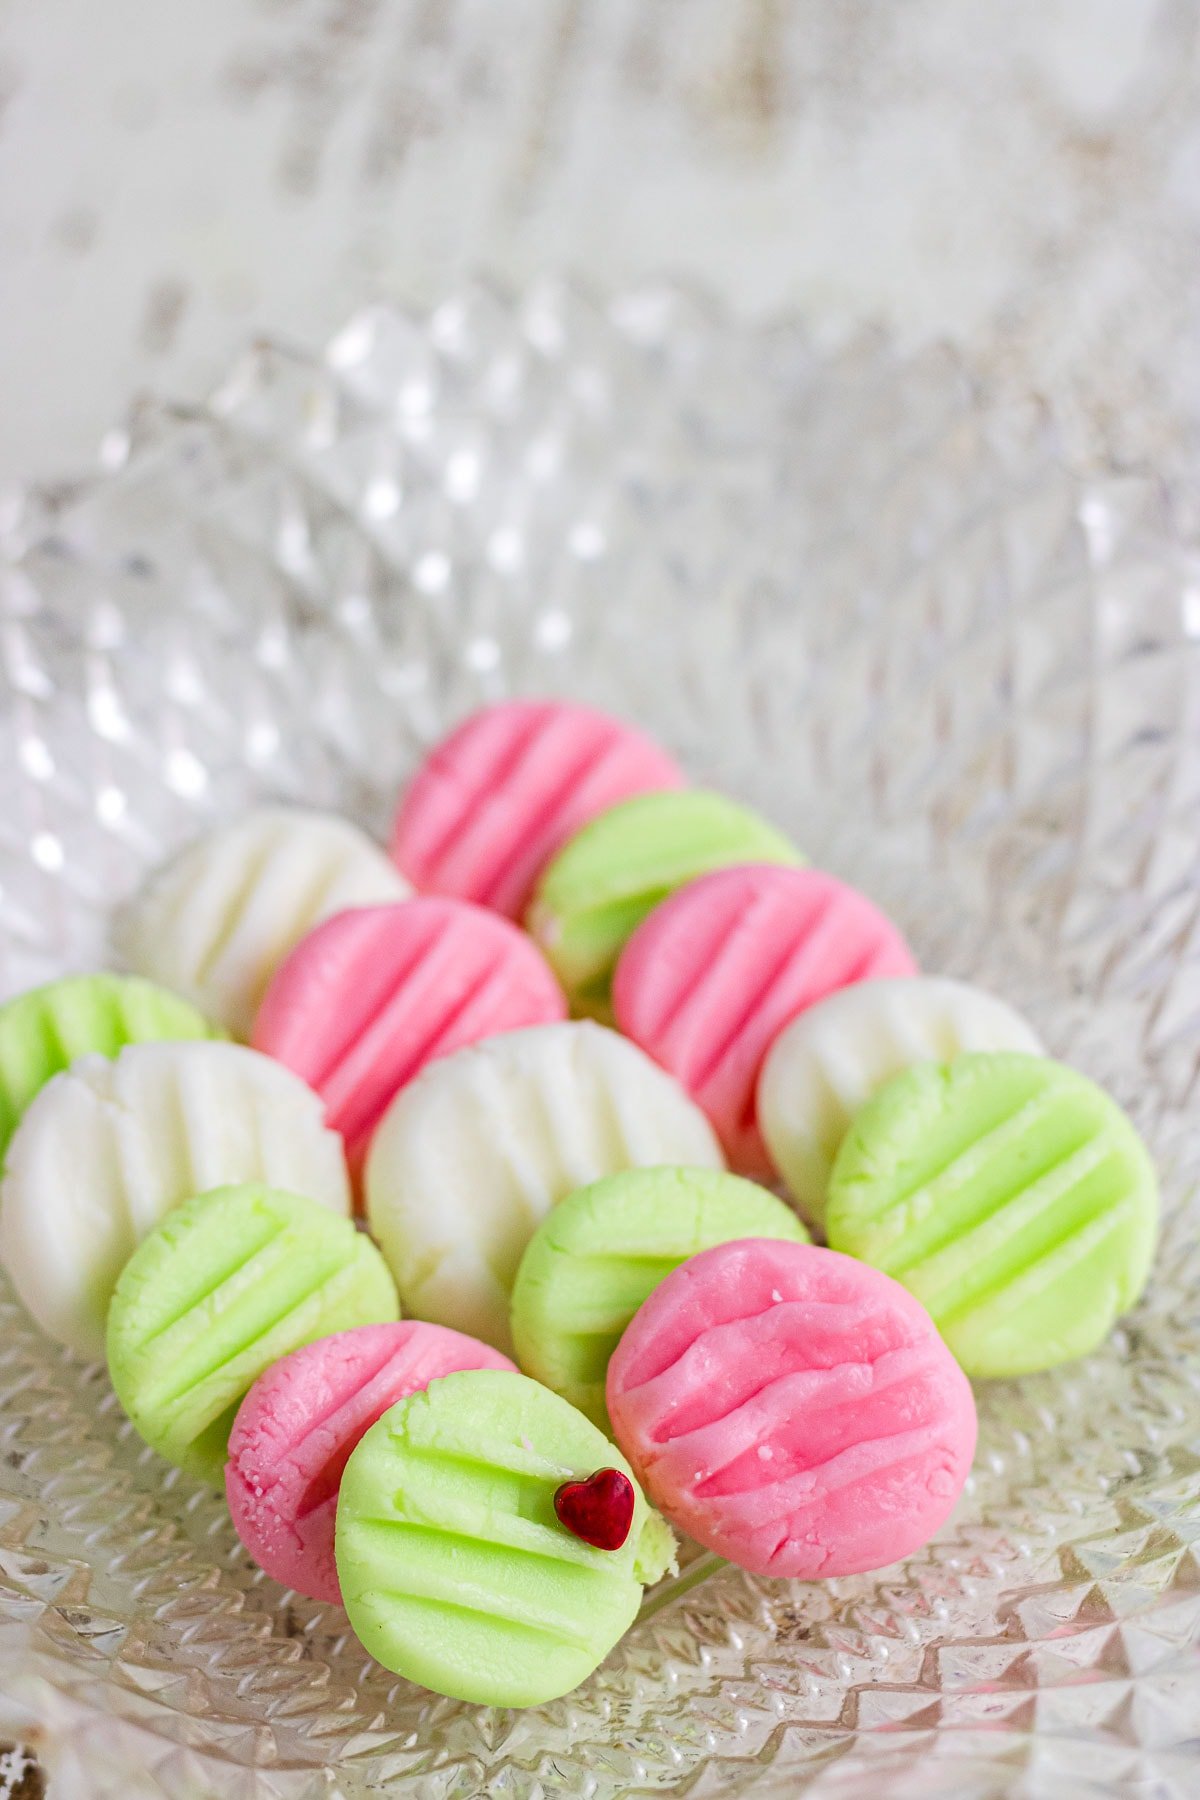 An up-close photo of pink, green, and white cream cheese butter mints in a decorative glass dish.